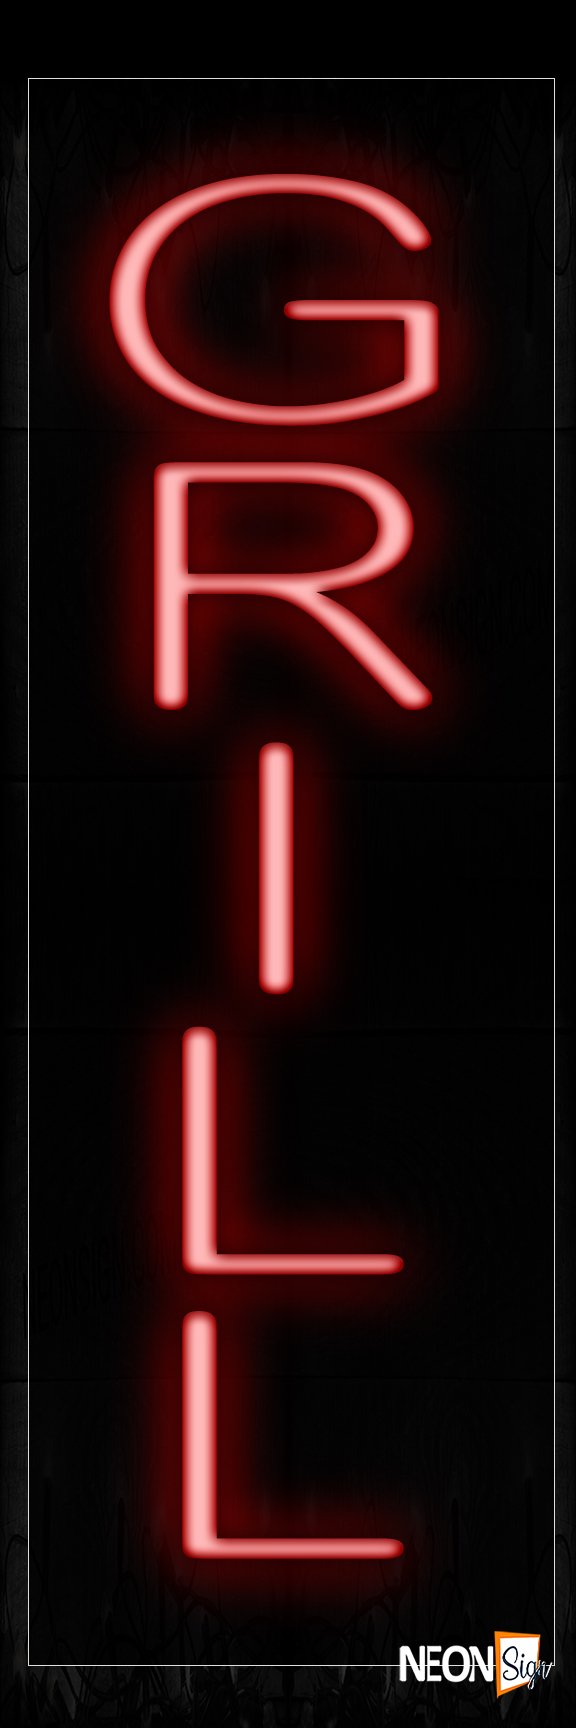 Image of 12239 Grill Vertical Red Text Traditional Neon_8x24 Black Backing